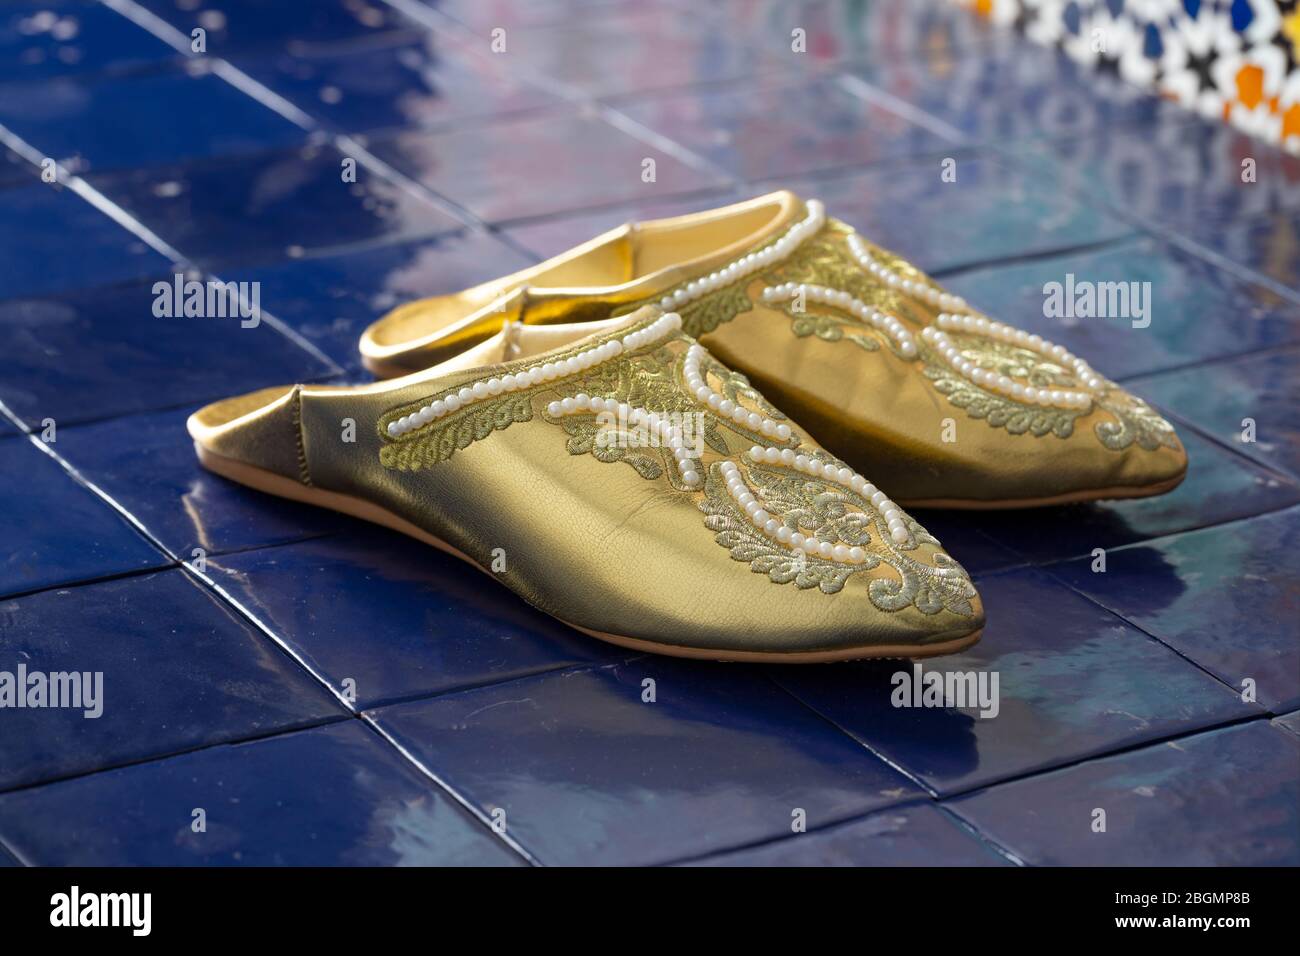 Traditional Moroccan pair of festive golden slippers at a floor with blue tiles Stock Photo